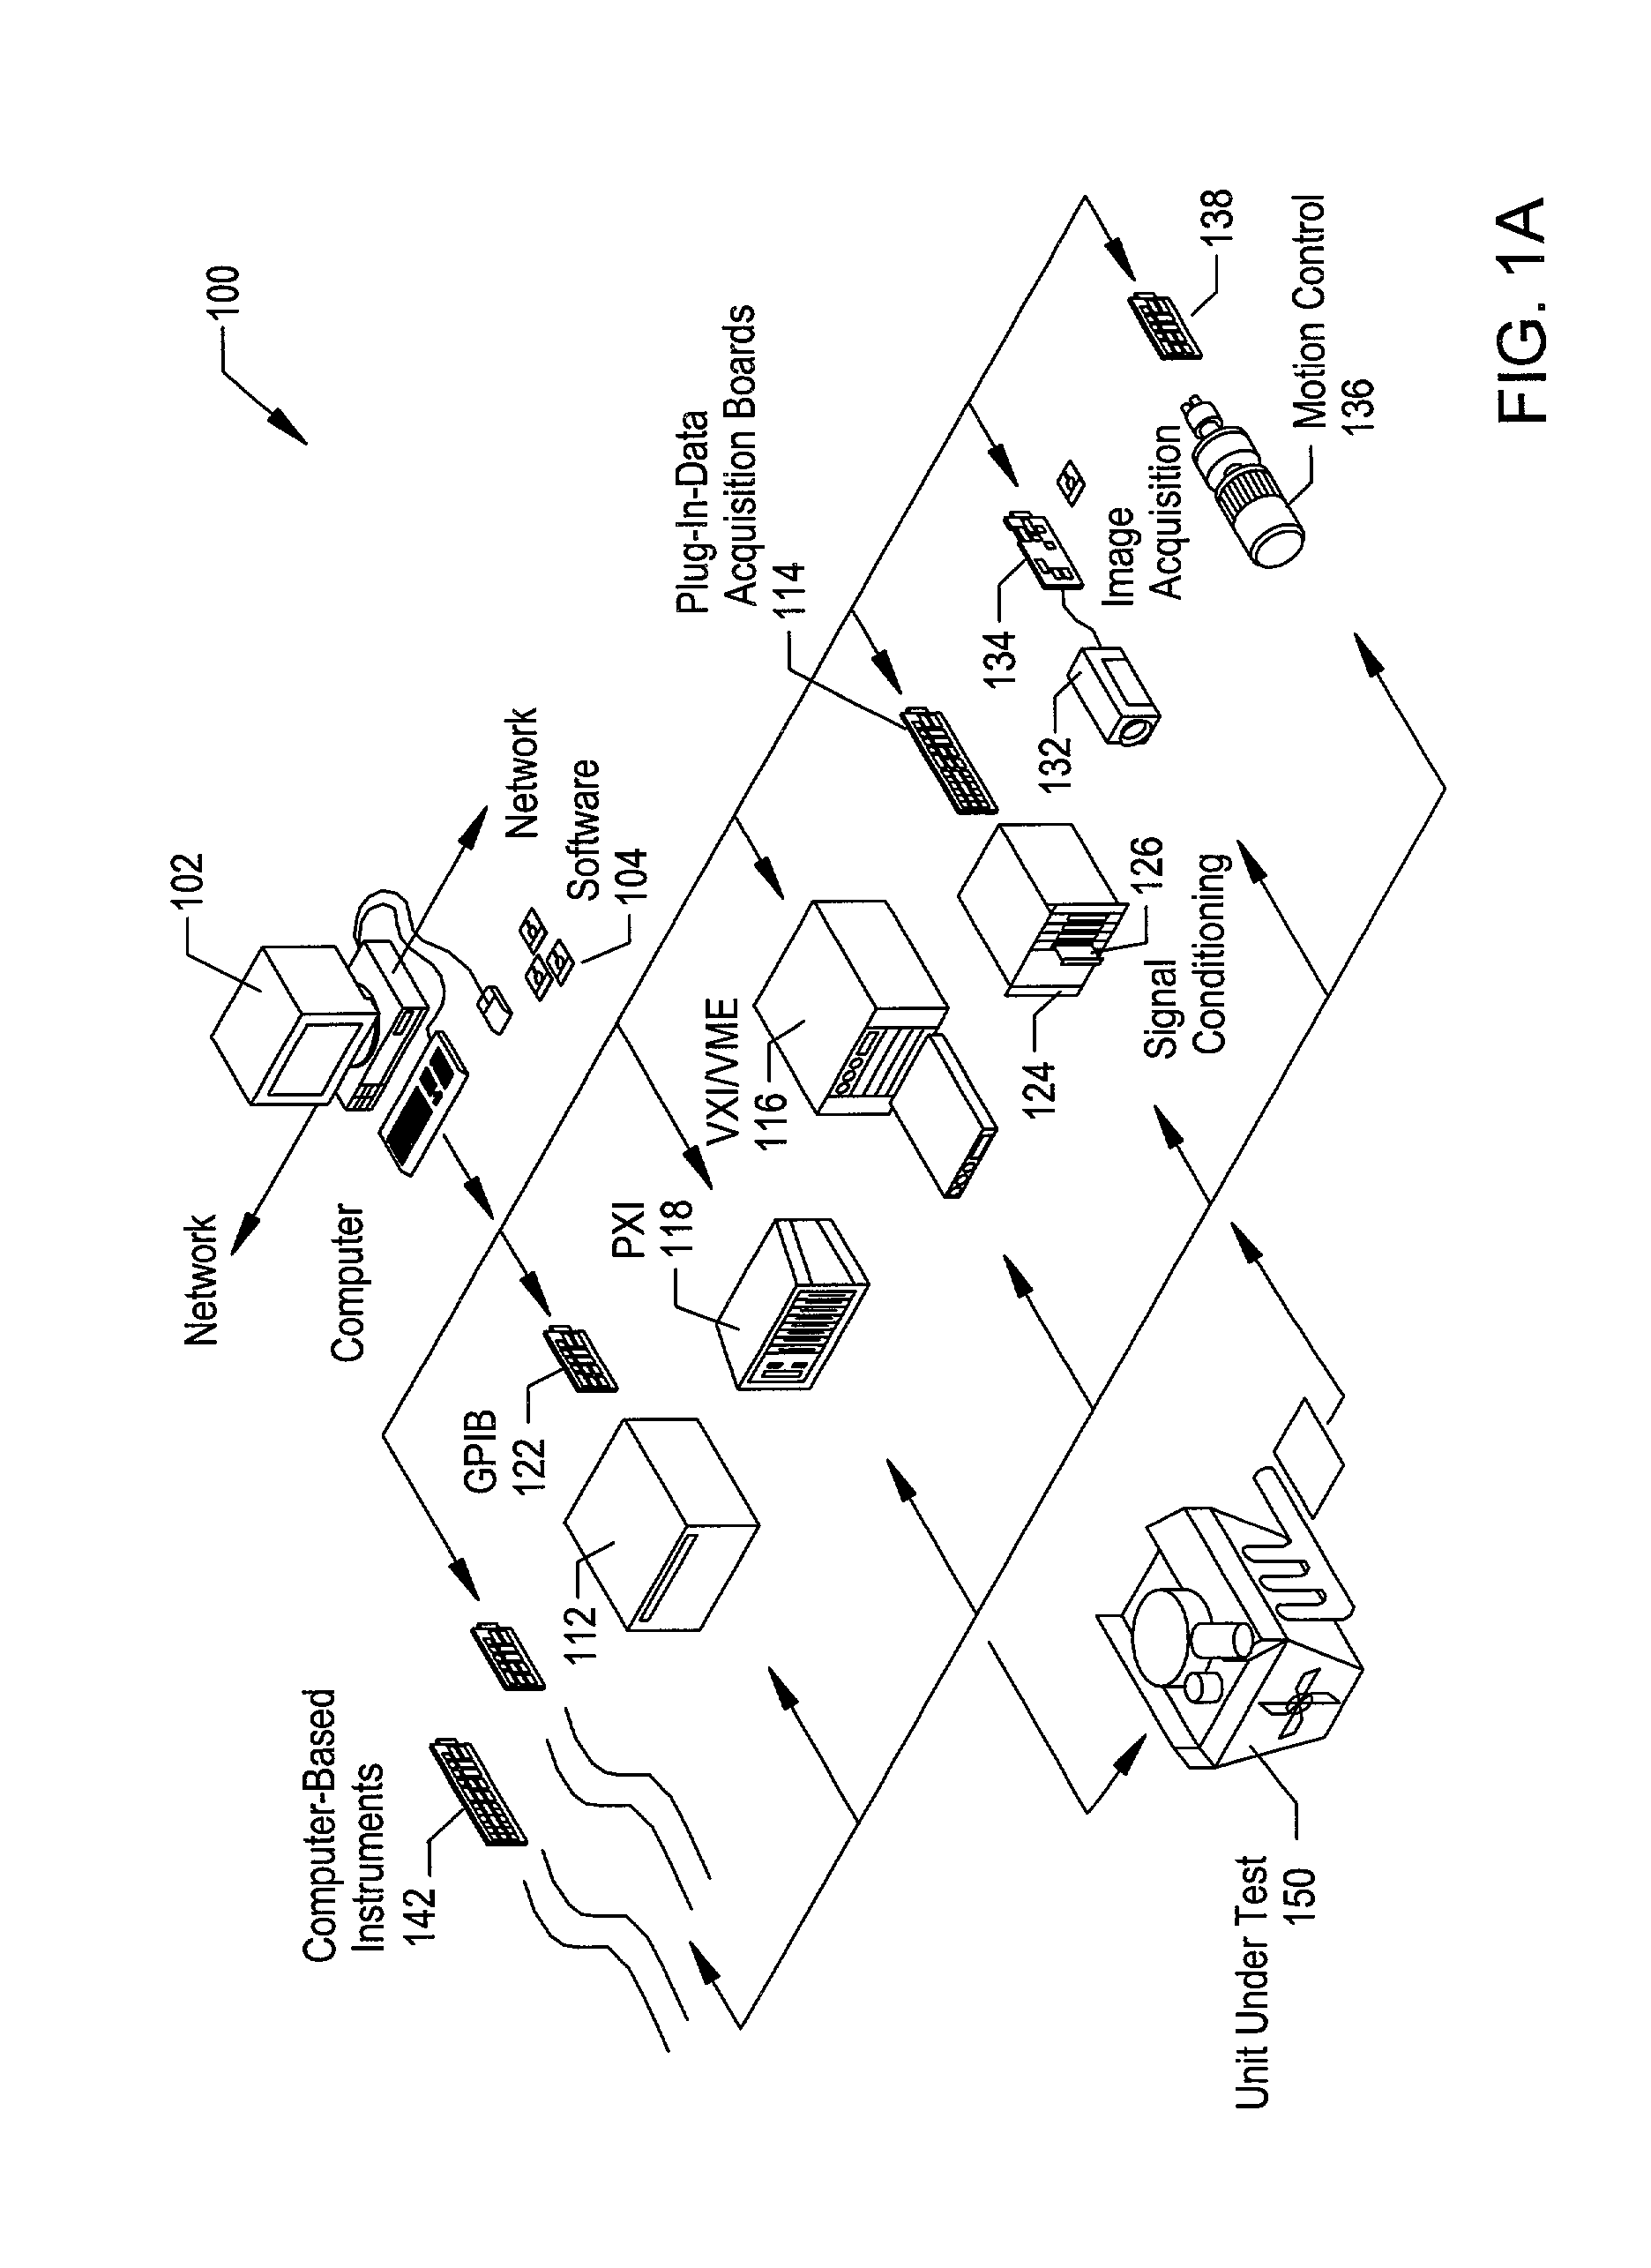 System and method for performing type checking for hardware device nodes in a graphical program